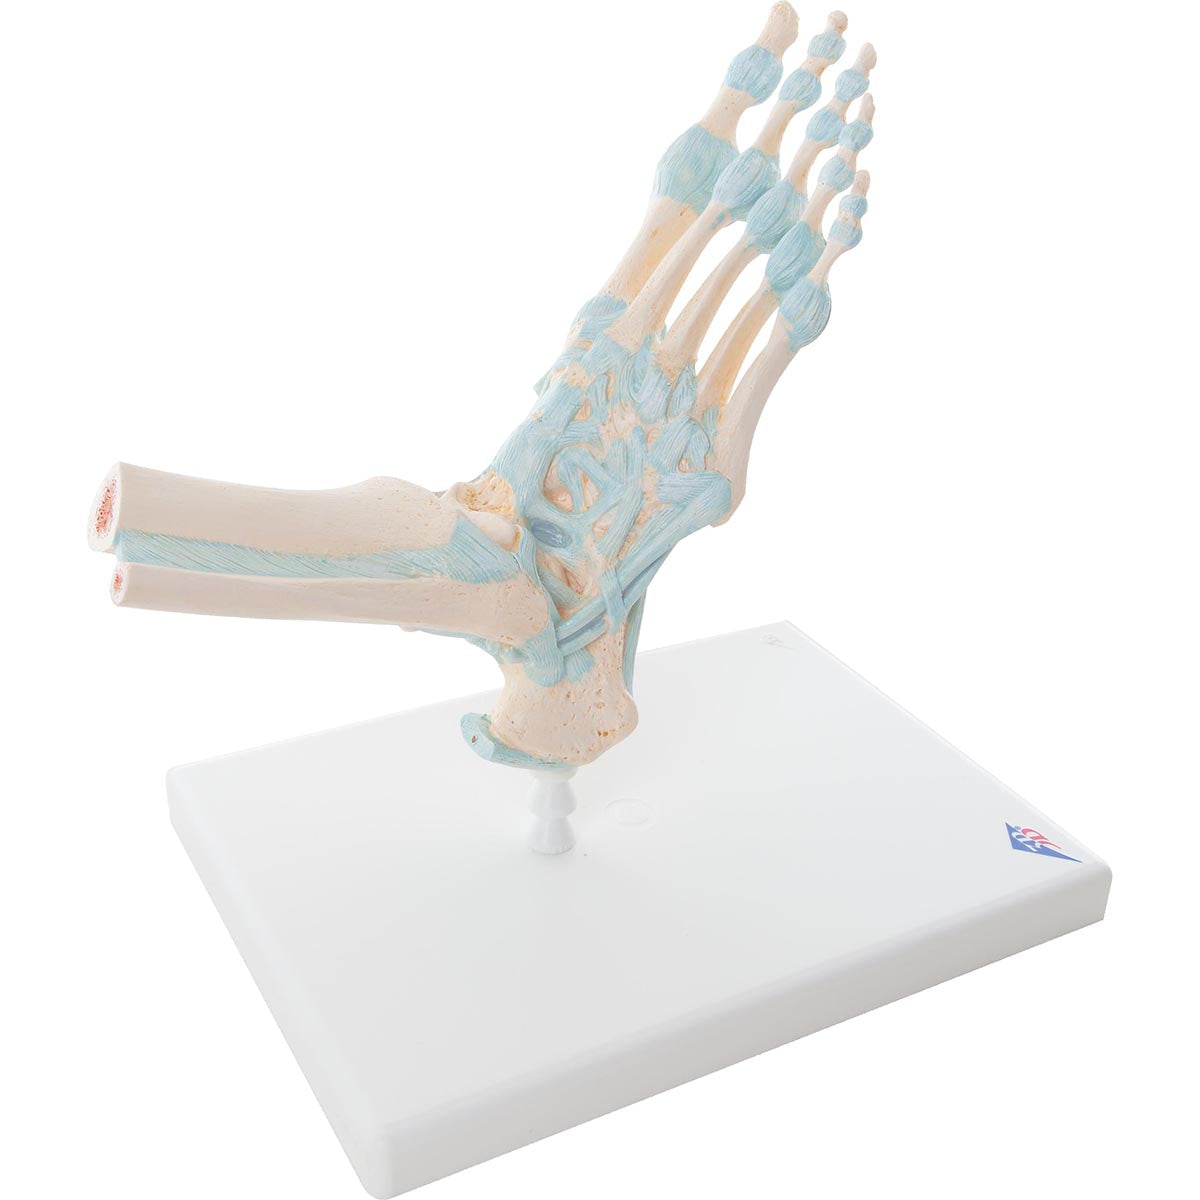 Model of the skeleton of the foot with ligaments and the Achilles tendon as well as a bit of the shin and calf